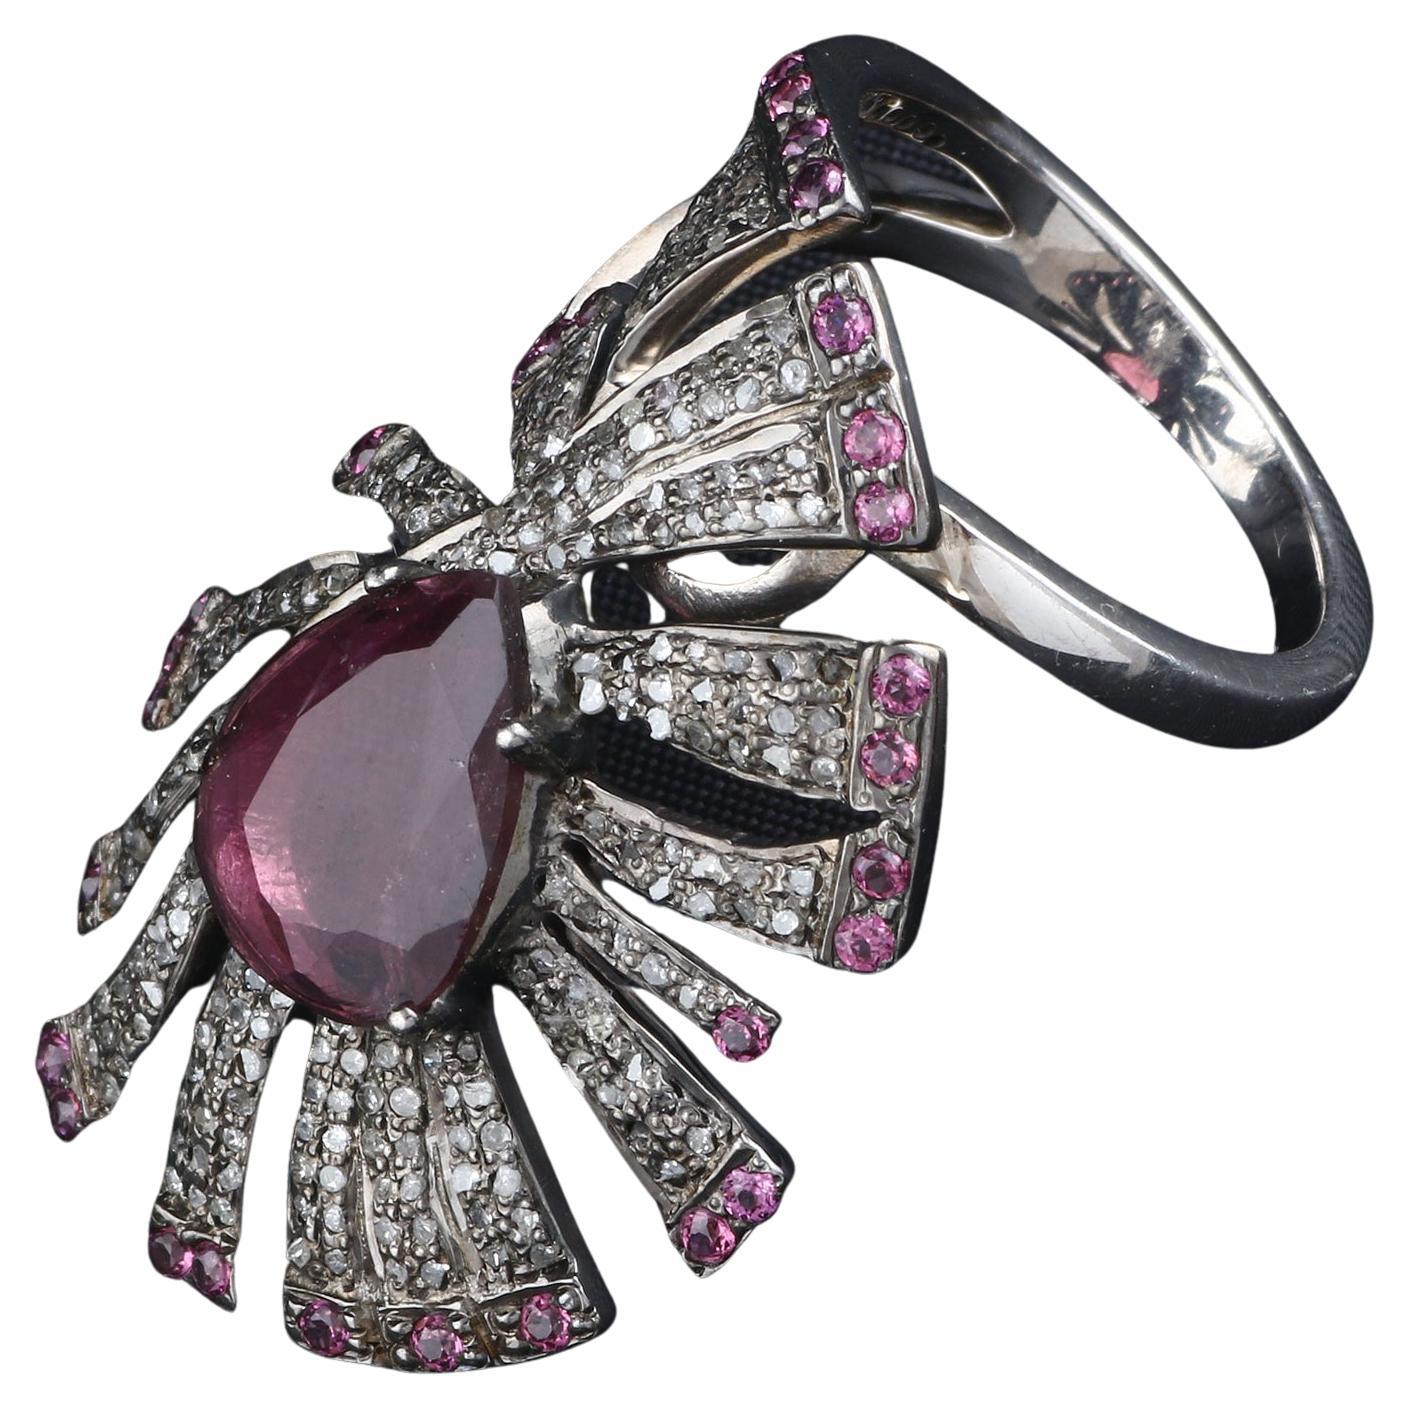 Item details:-

✦ SKU:- ESRG00126

✦ Material :- Silver
✦ Gemstone Specification:-
✧ Diamond
✧ Pink Sapphire, Pink Tourmaline

✦ Approx. Diamond Weight : 0.75
✦ Approx. Silver Weight : 8.93
✦ Approx. Gross Weight : 9.62

Ring Size (US): 8

You will